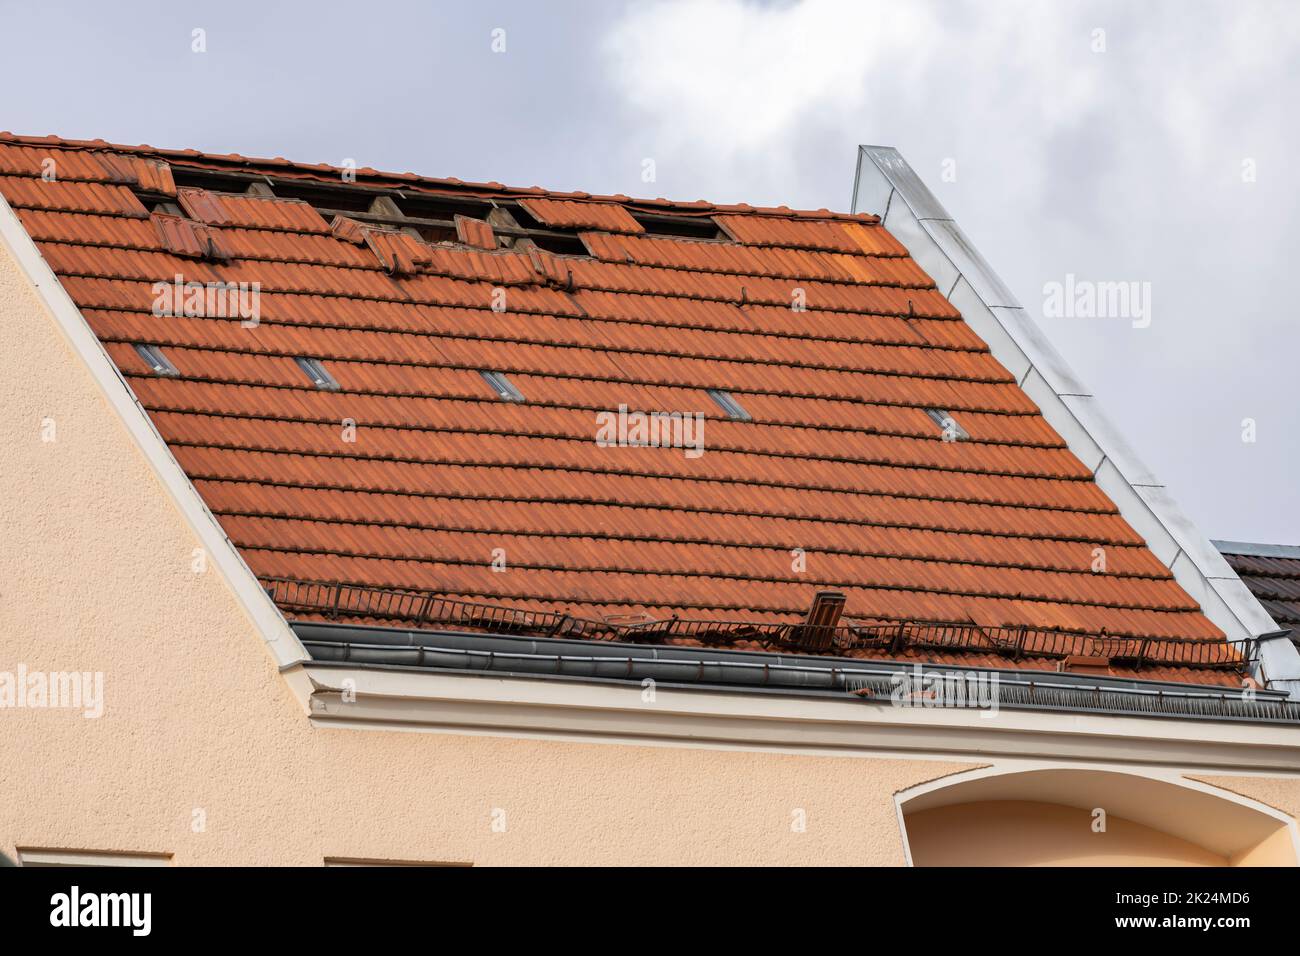 The hurricane 'Zeynep' developed tremendous forces and kept the Berlin fire brigade in suspense. In Berlin's Hermannstraße, several roofs damaged by t Stock Photo